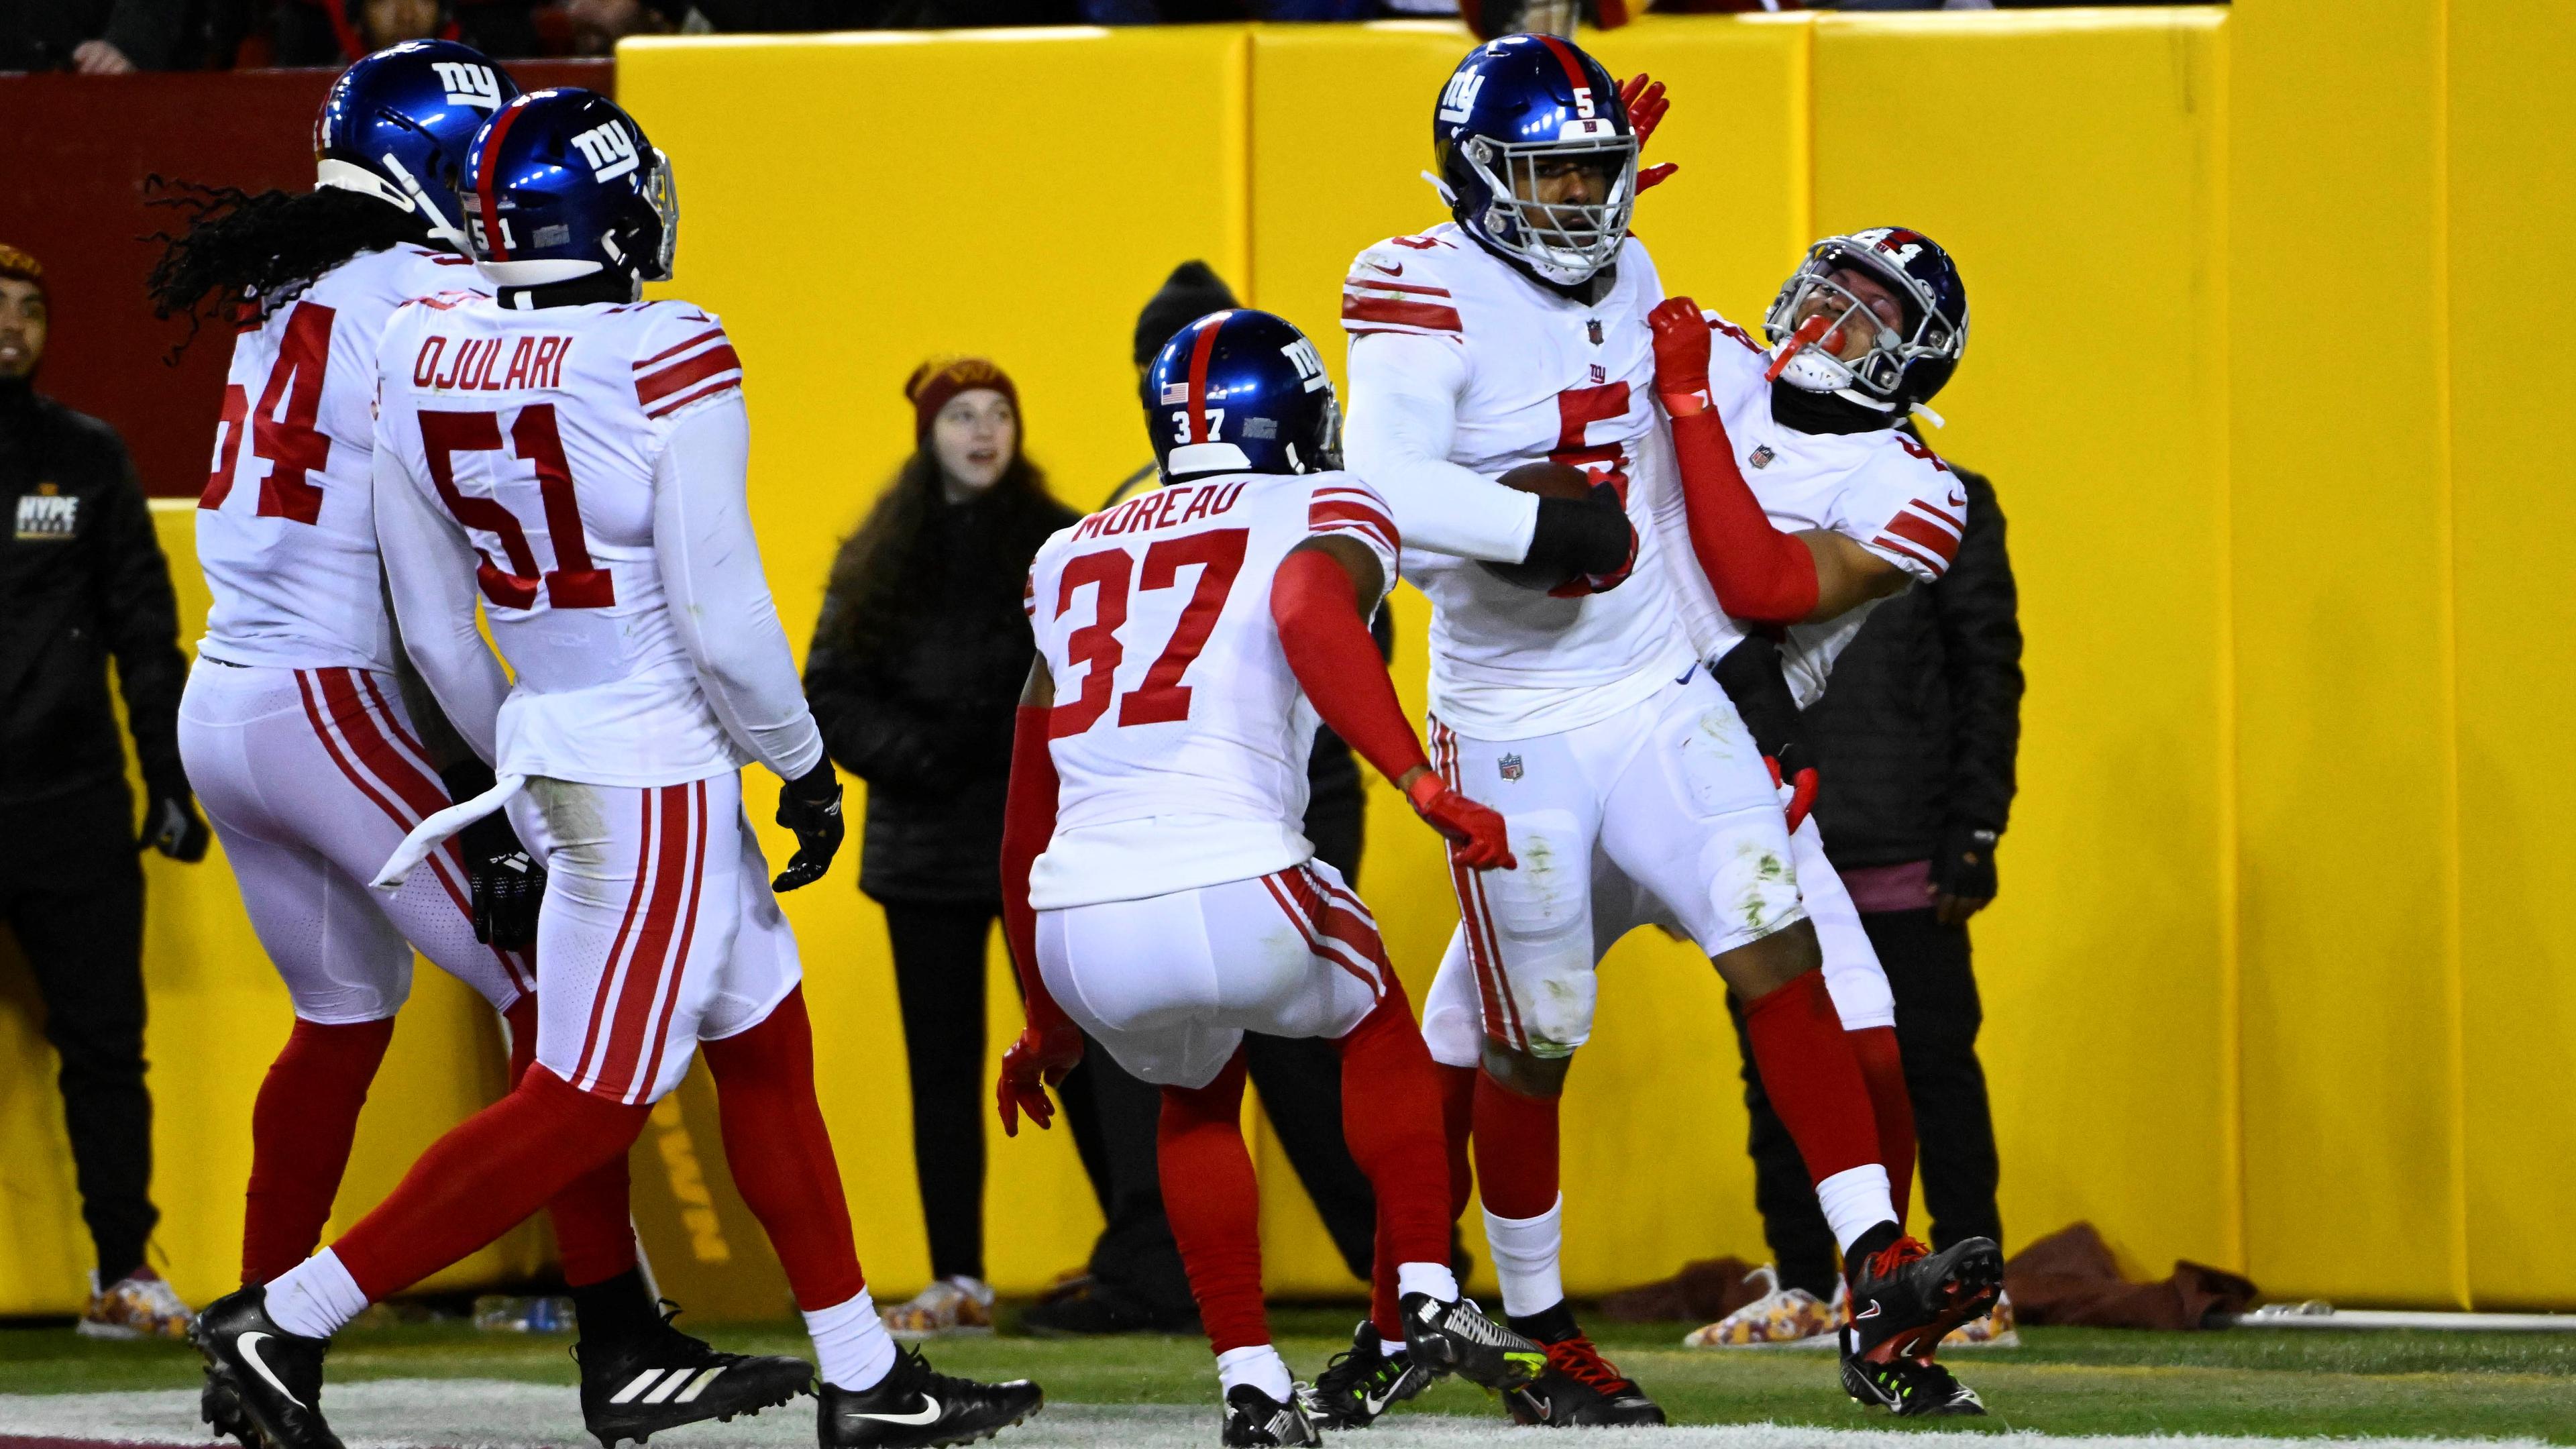 Dec 18, 2022; Landover, Maryland, USA; New York Giants defensive end Kayvon Thibodeaux (5) is congratulated by teammates after scoring a touchdown against the Washington Commanders during the first half at FedExField. Mandatory Credit: Brad Mills-USA TODAY Sports / © Brad Mills-USA TODAY Sports